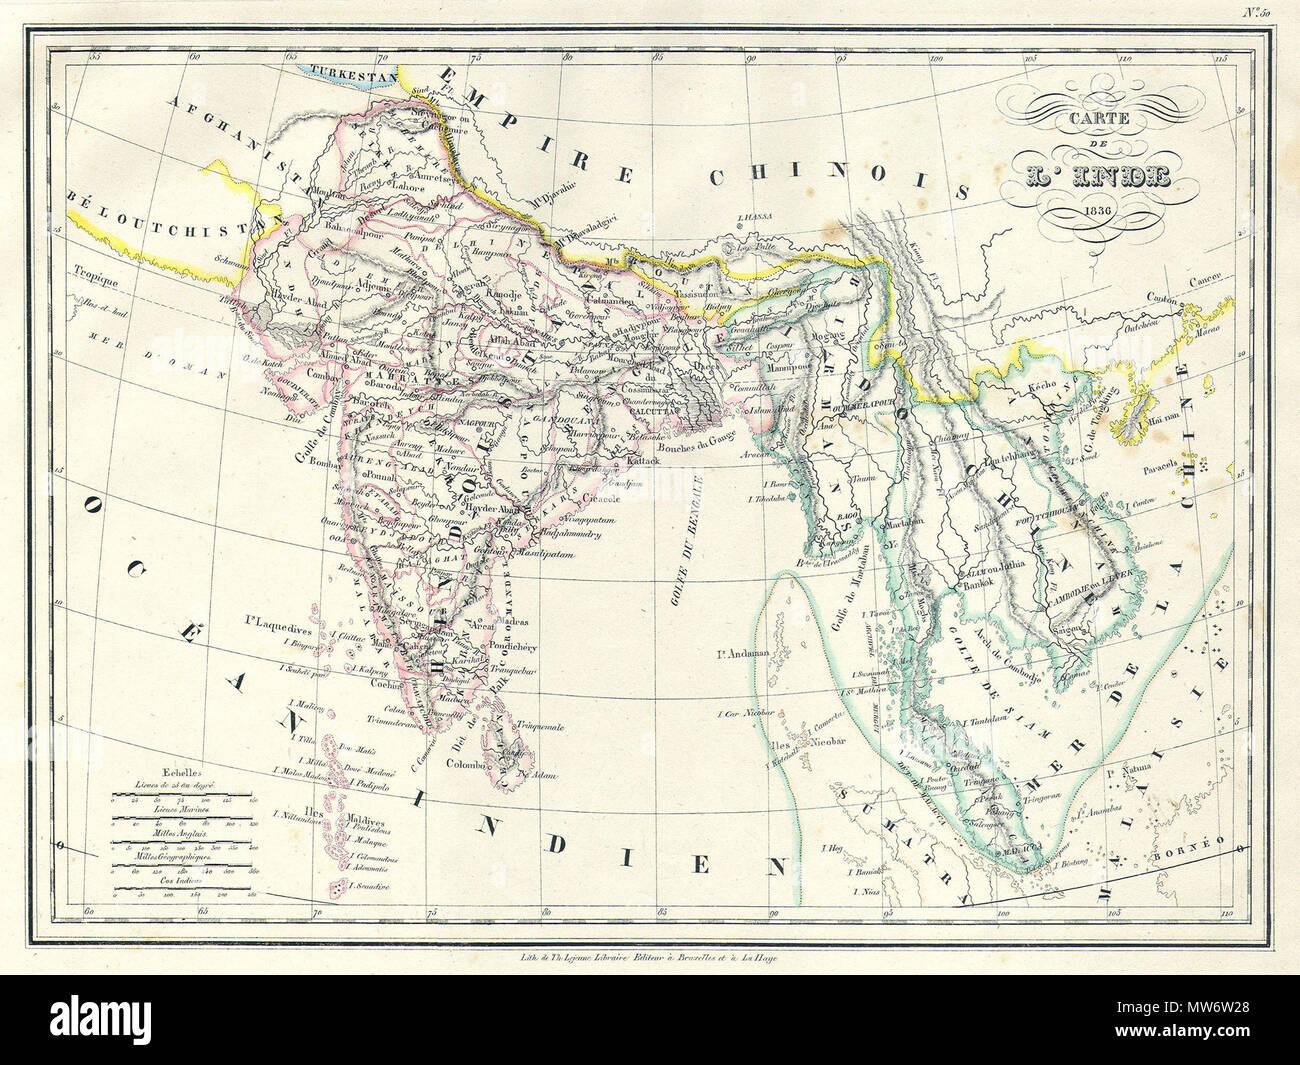 Carte de L'Inde. English: This is a beautiful 1836 copperplate lithograph  map of India and Southeast Asia by French cartographer Malte-Brun. Includes  the modern day nations of India, Bangladesh, Burma (Myanmar),